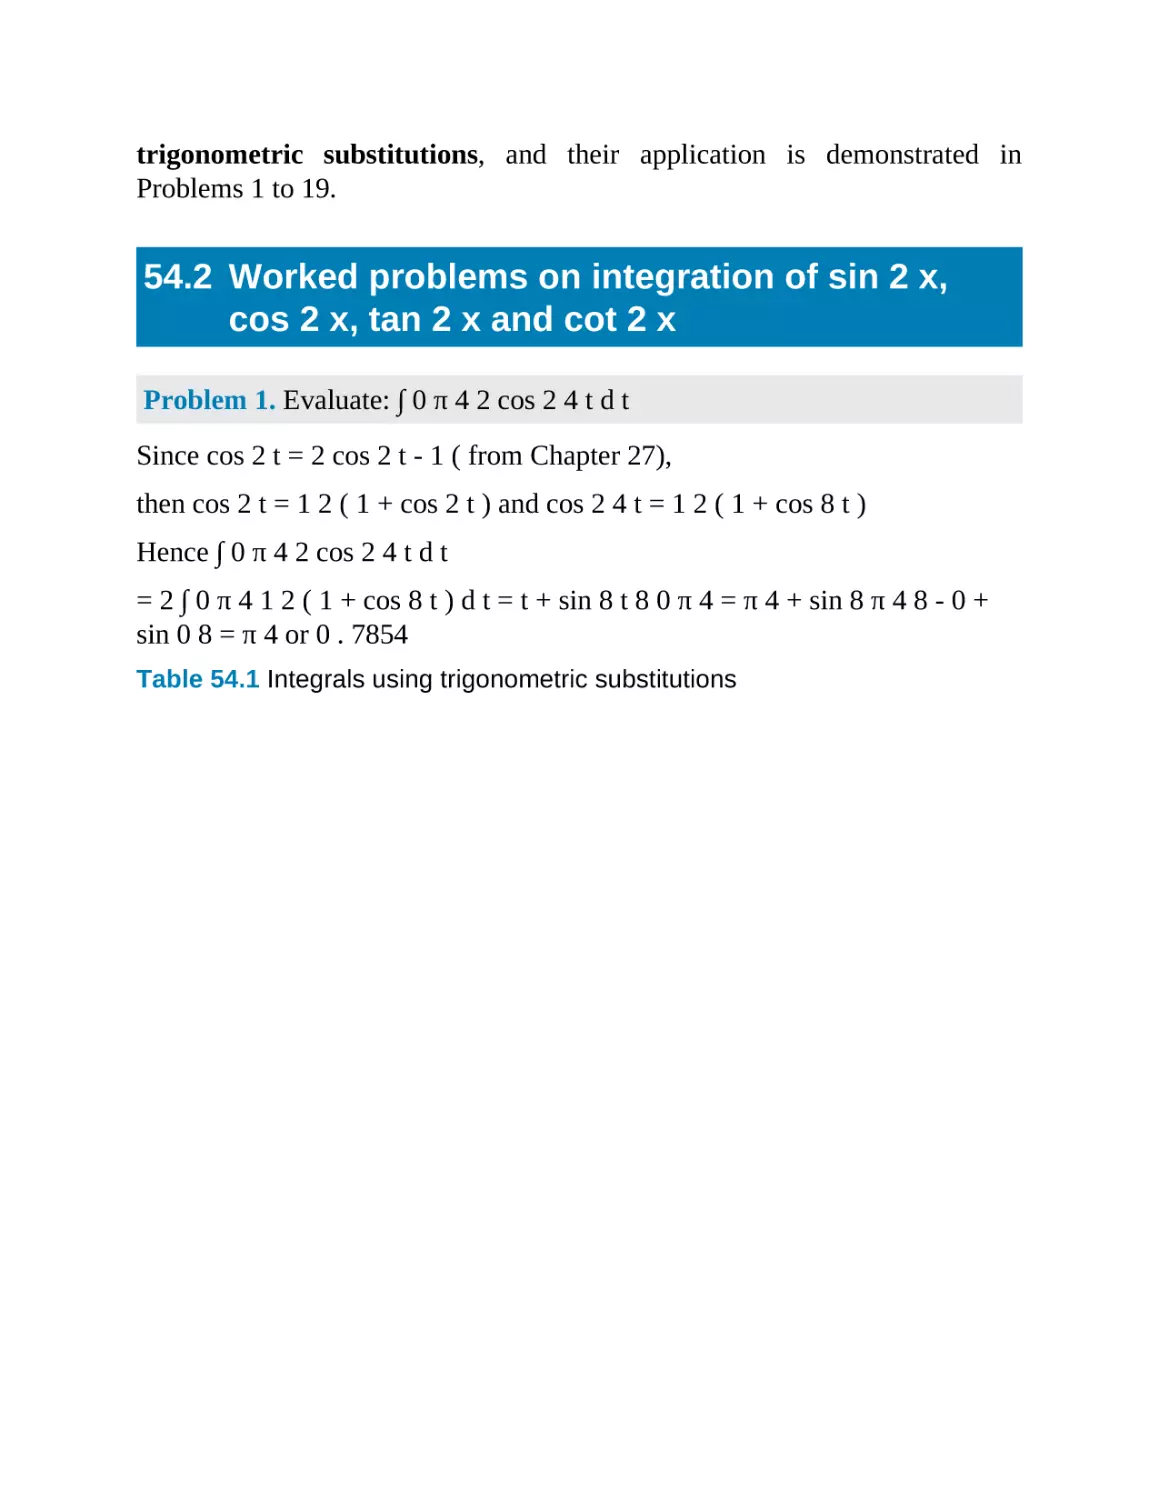 54.2 Worked problems on integration of x, x, x and x